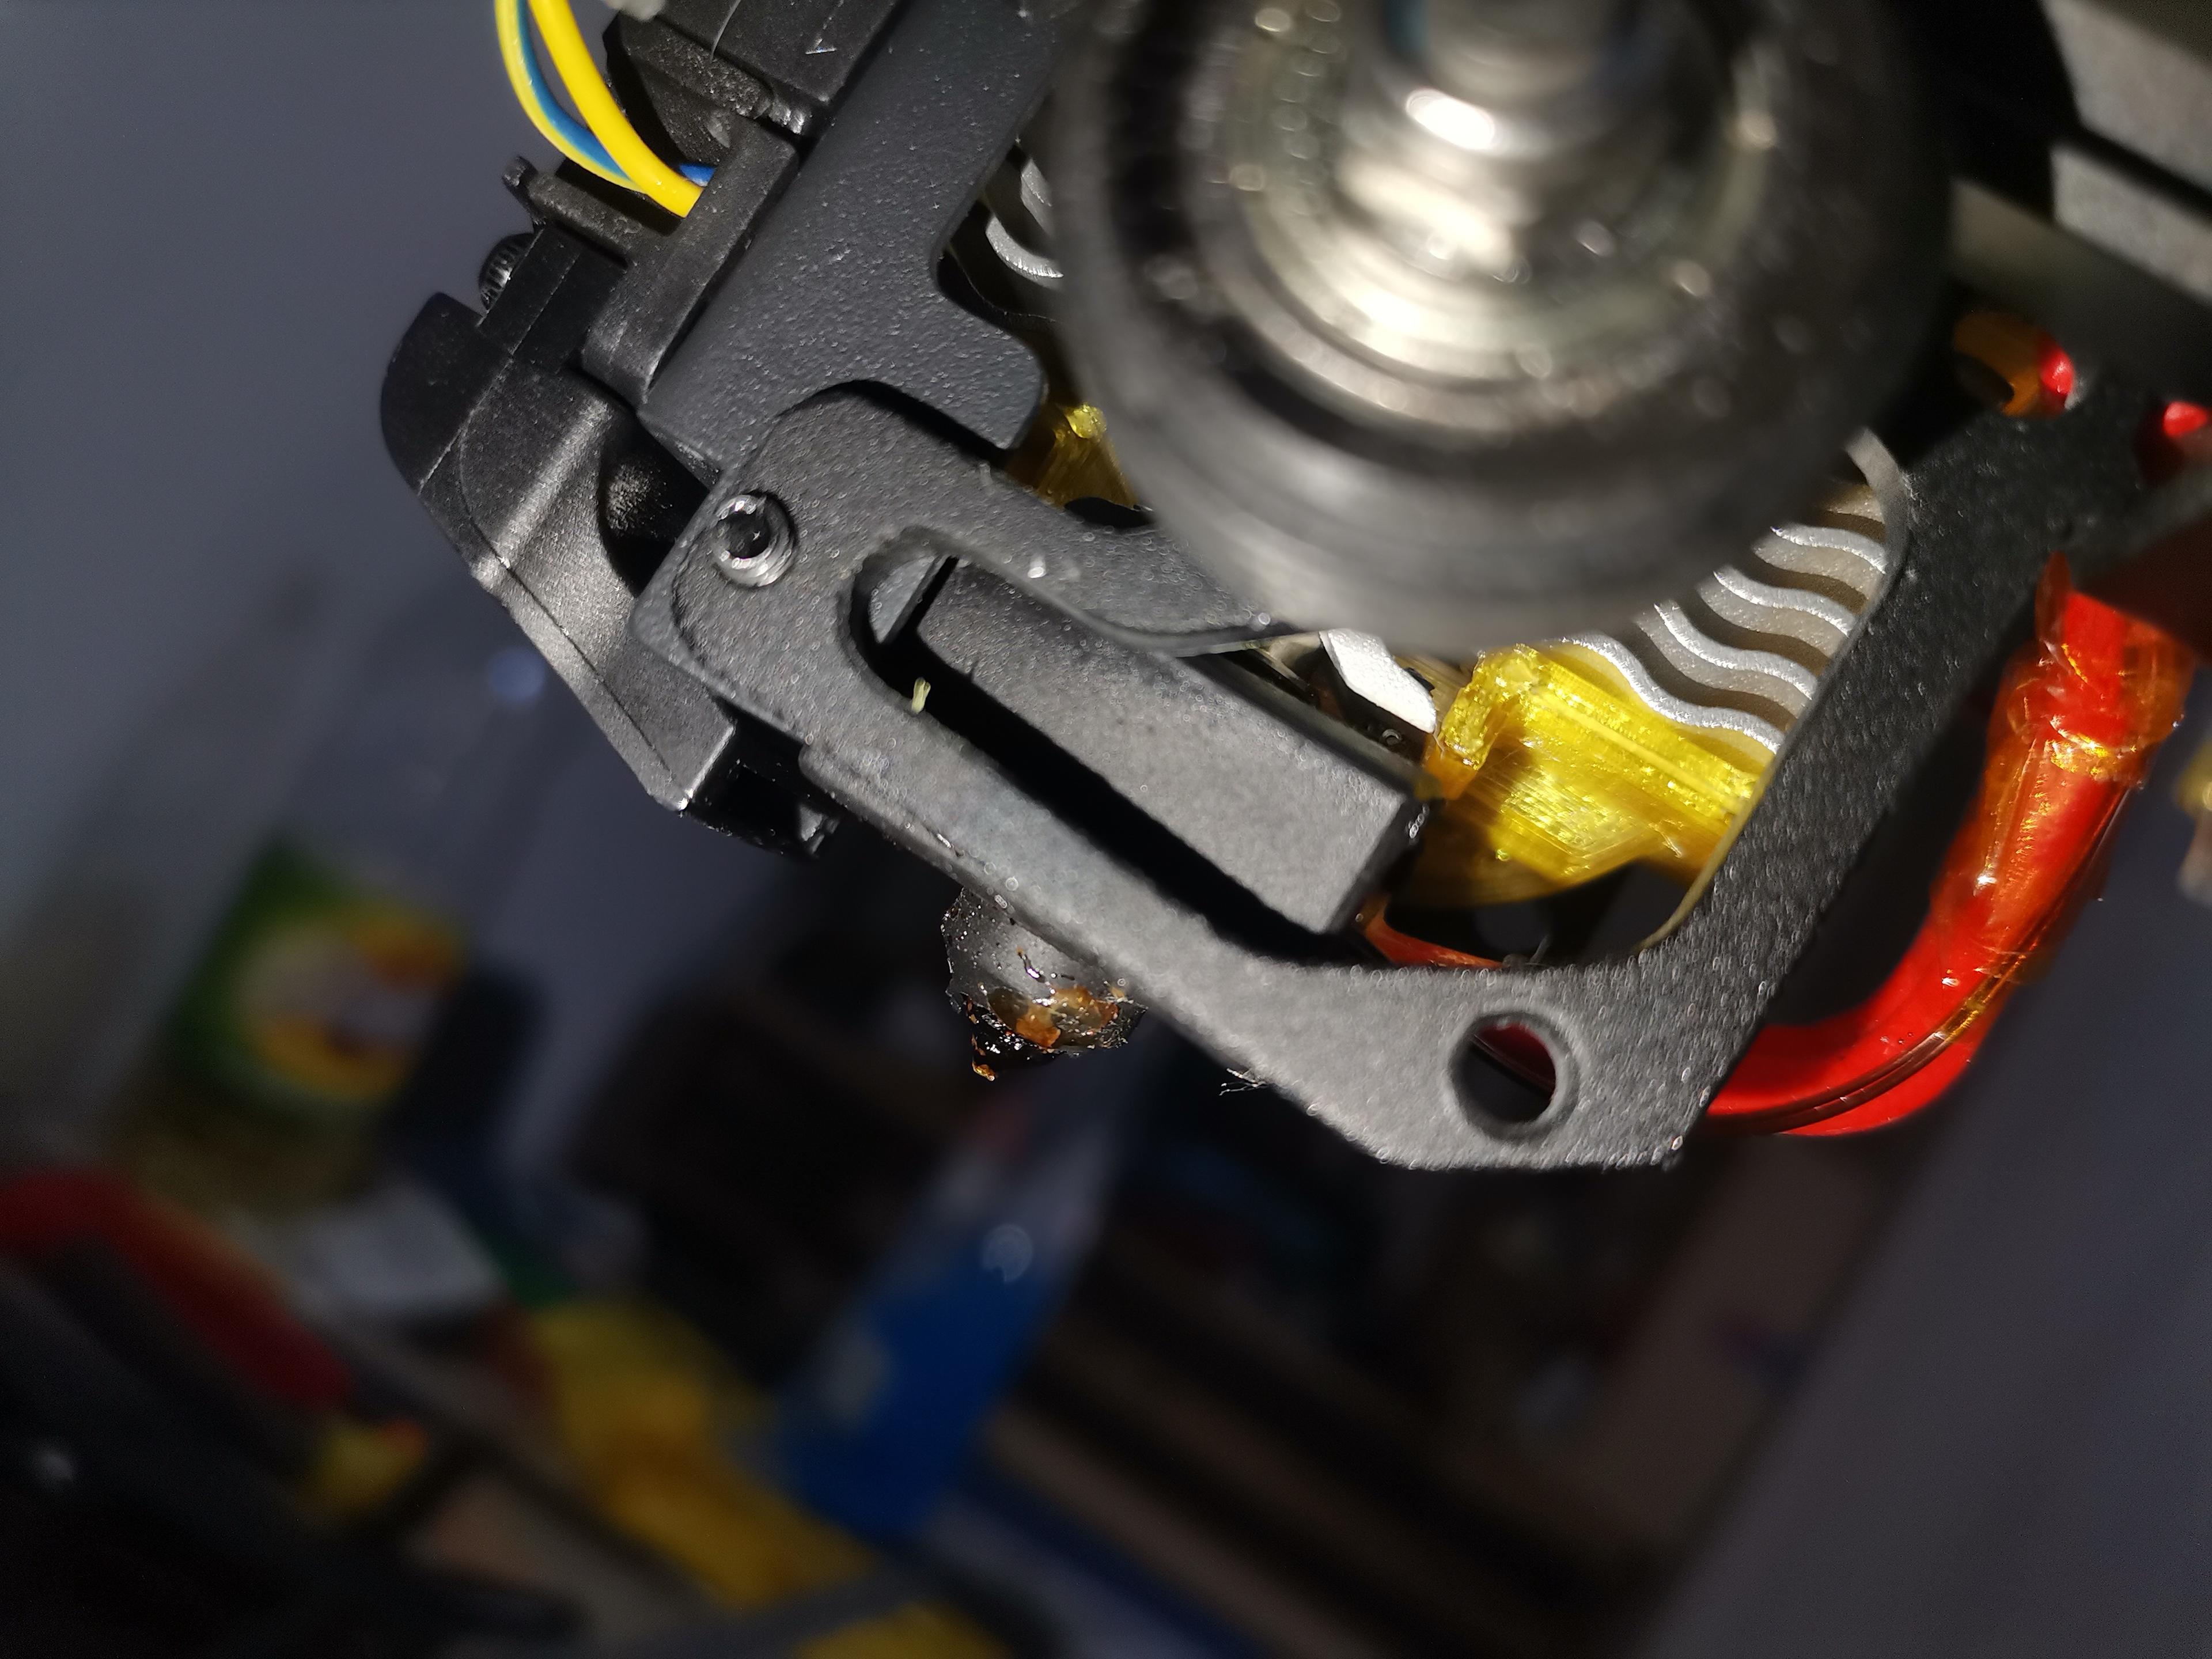 cr-10 Smart hotend fan support - The duct is close to the heatsink so no air is blown down - 3d model